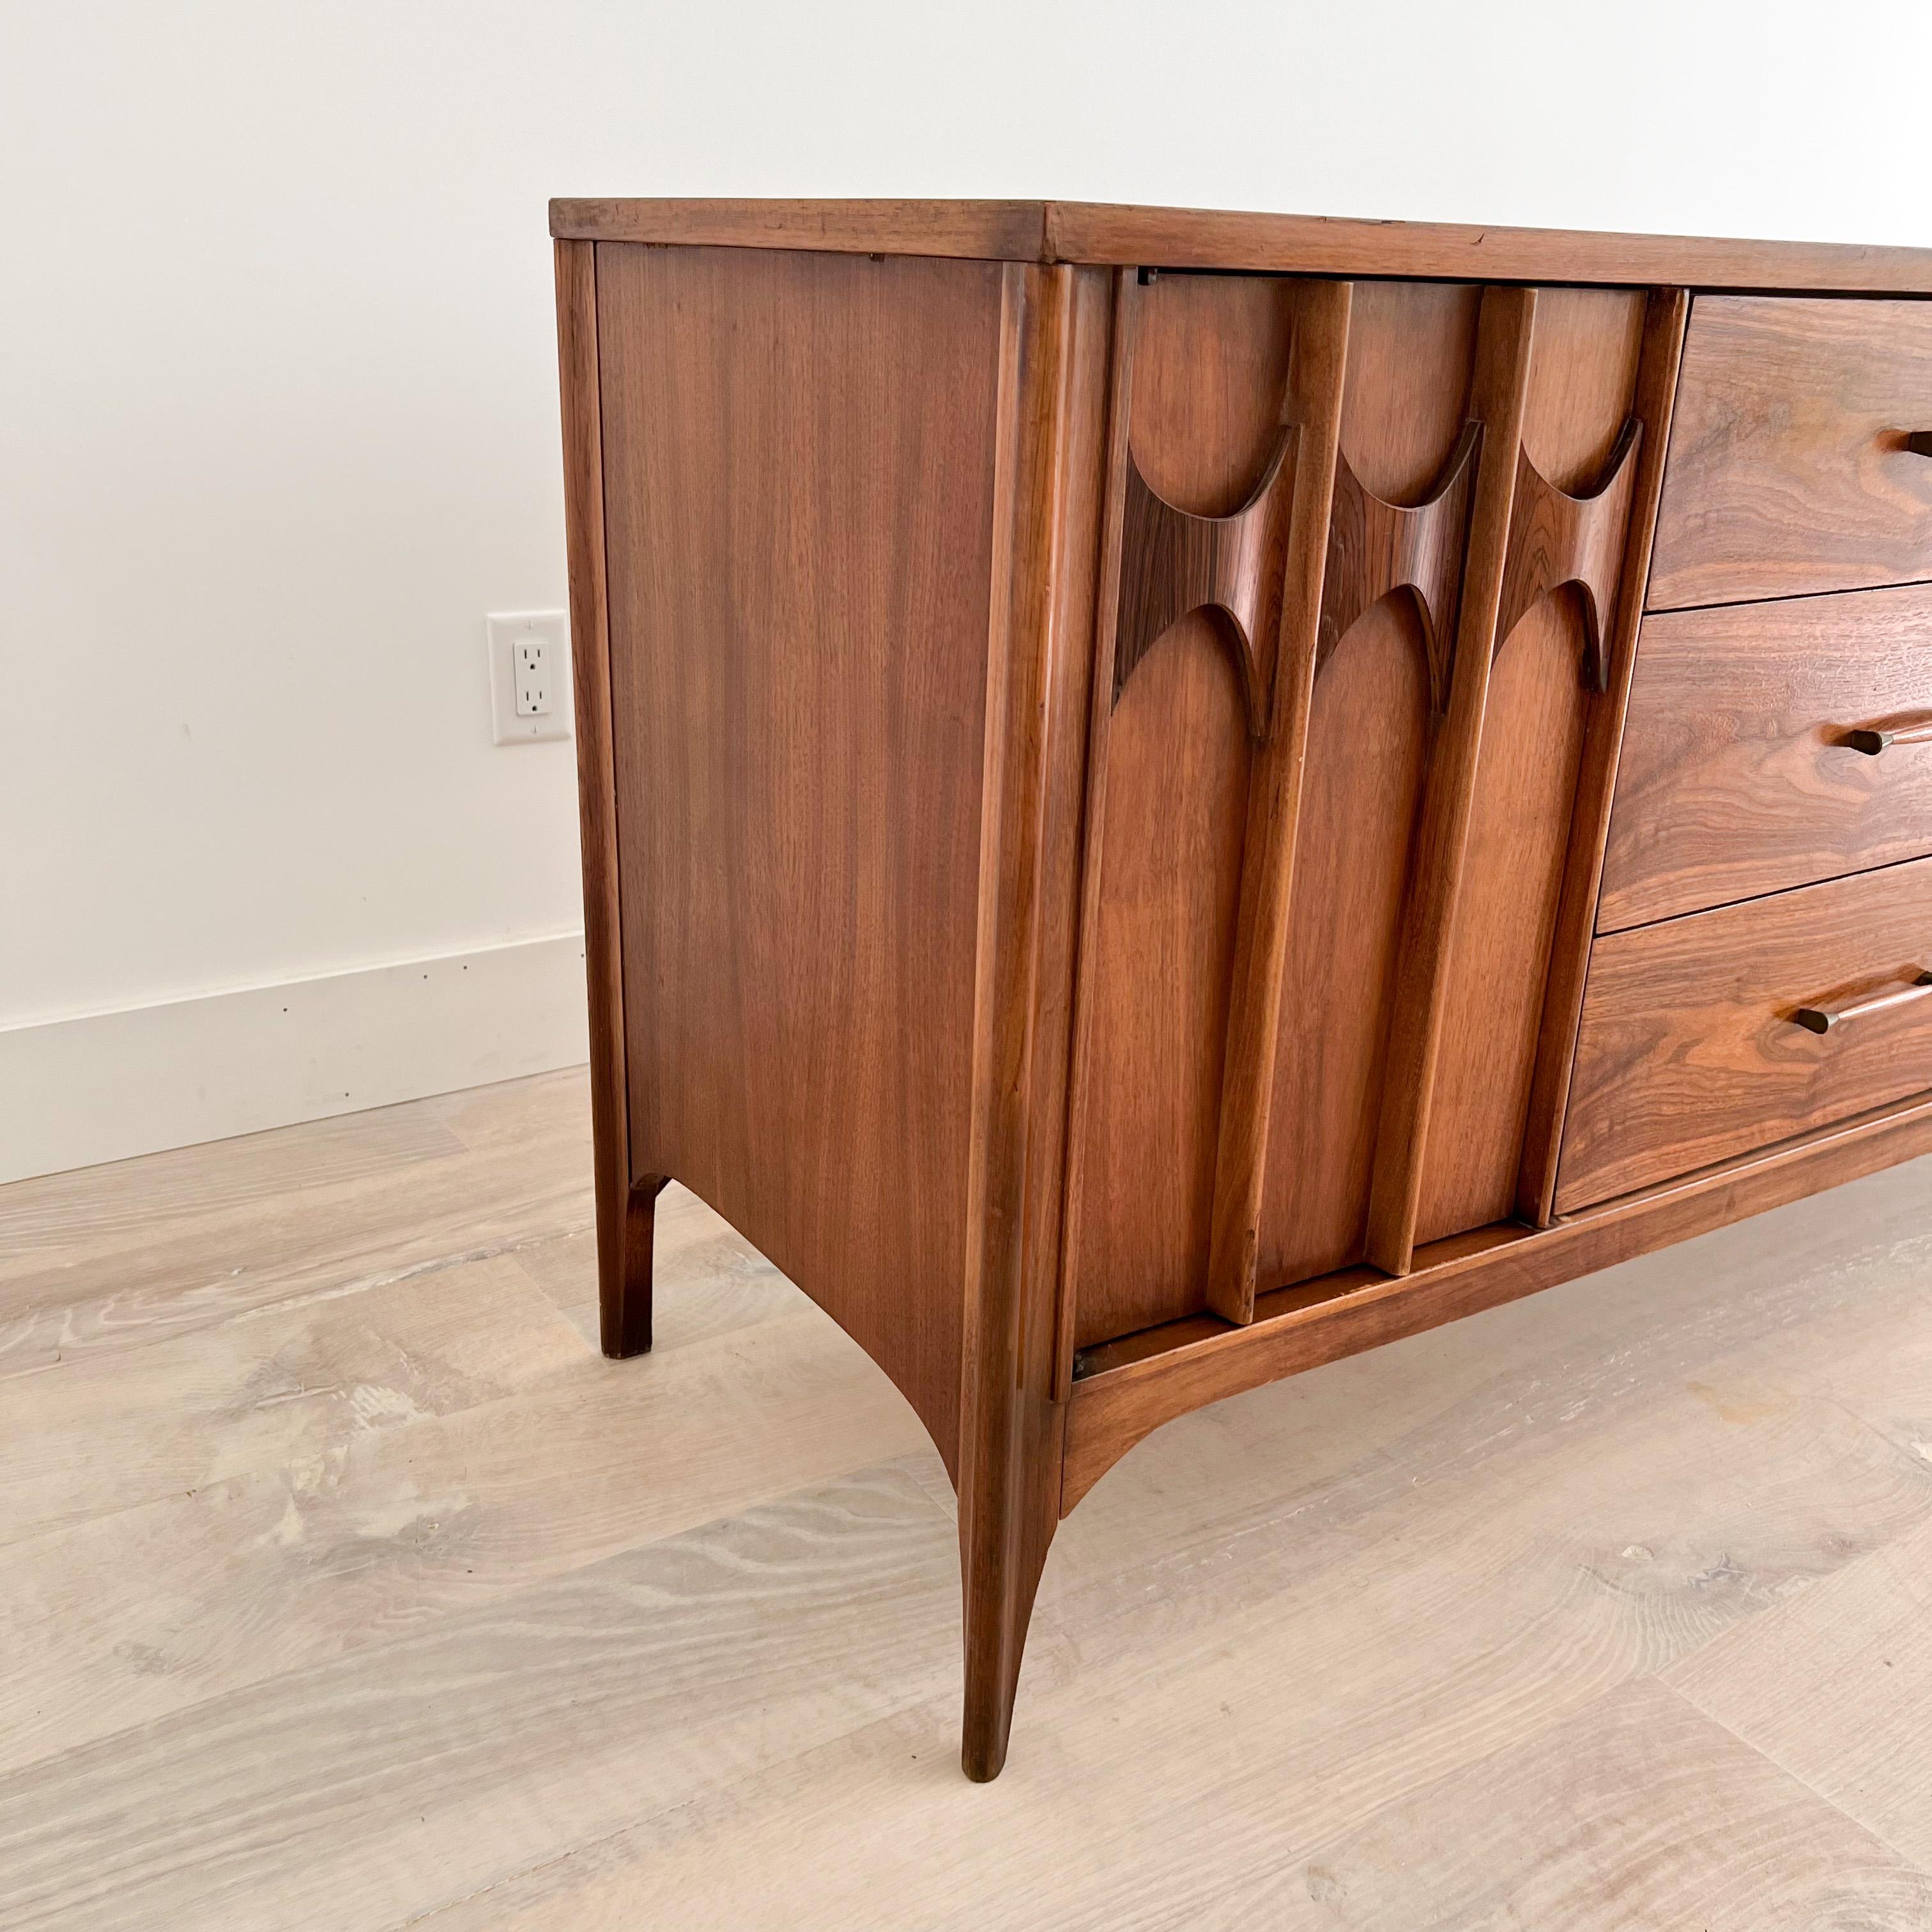 Mid-Century Modern walnut sculpted front 12 drawer dresser with rosewood accents by the Kent Coffey Persepcta line. Featuring six center drawers, two doors on each end that open up to three hidden drawers.